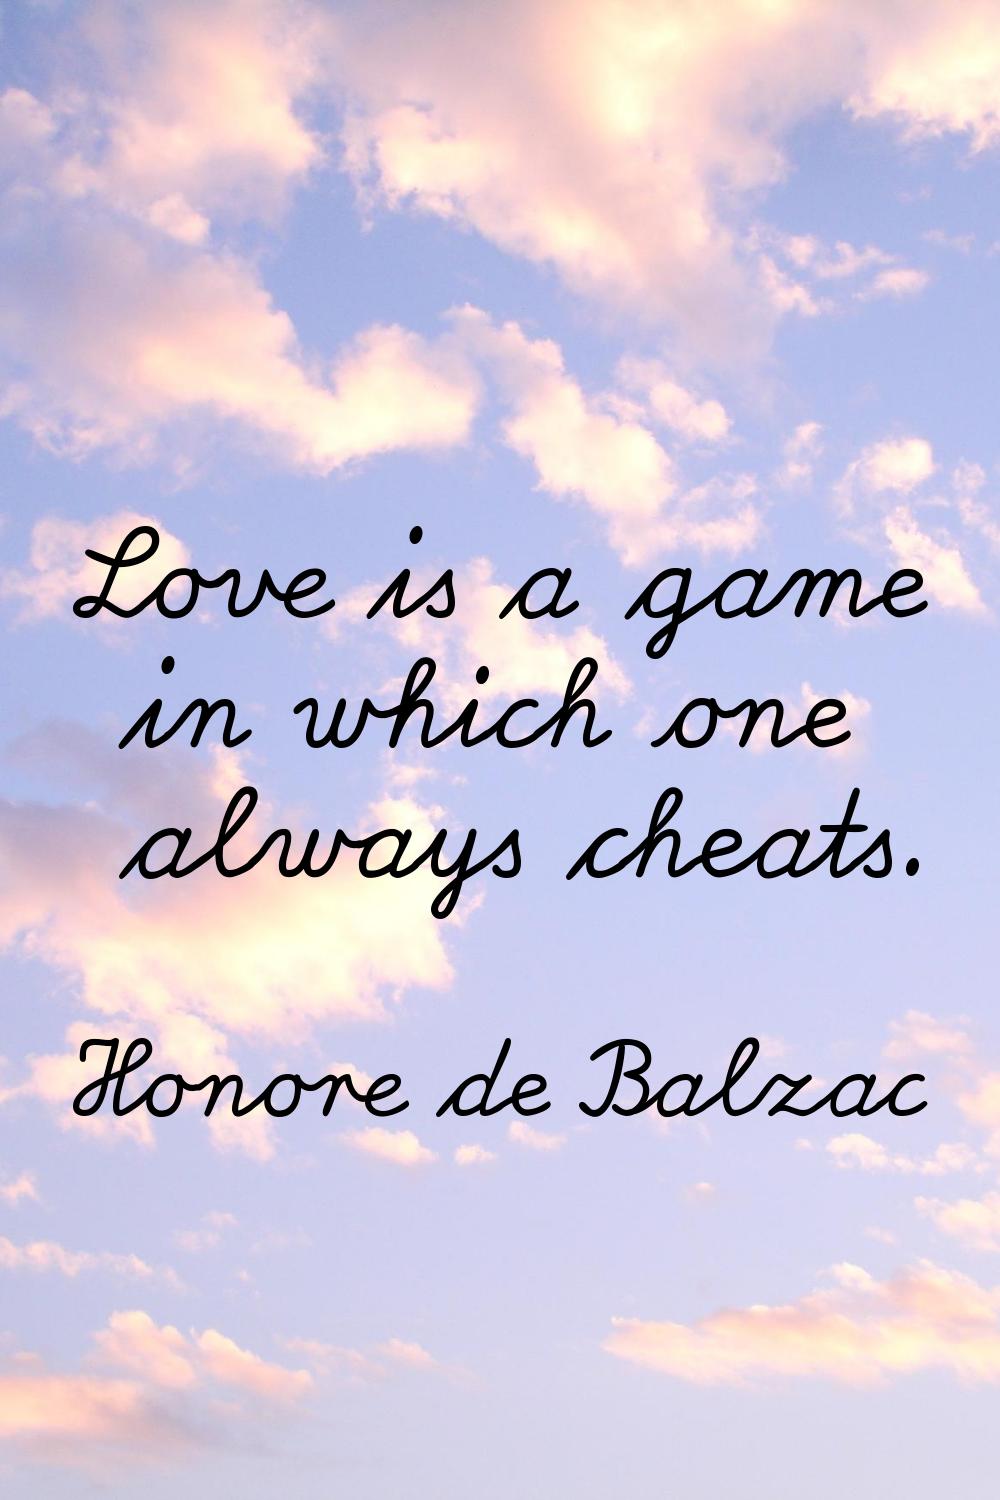 Love is a game in which one always cheats.